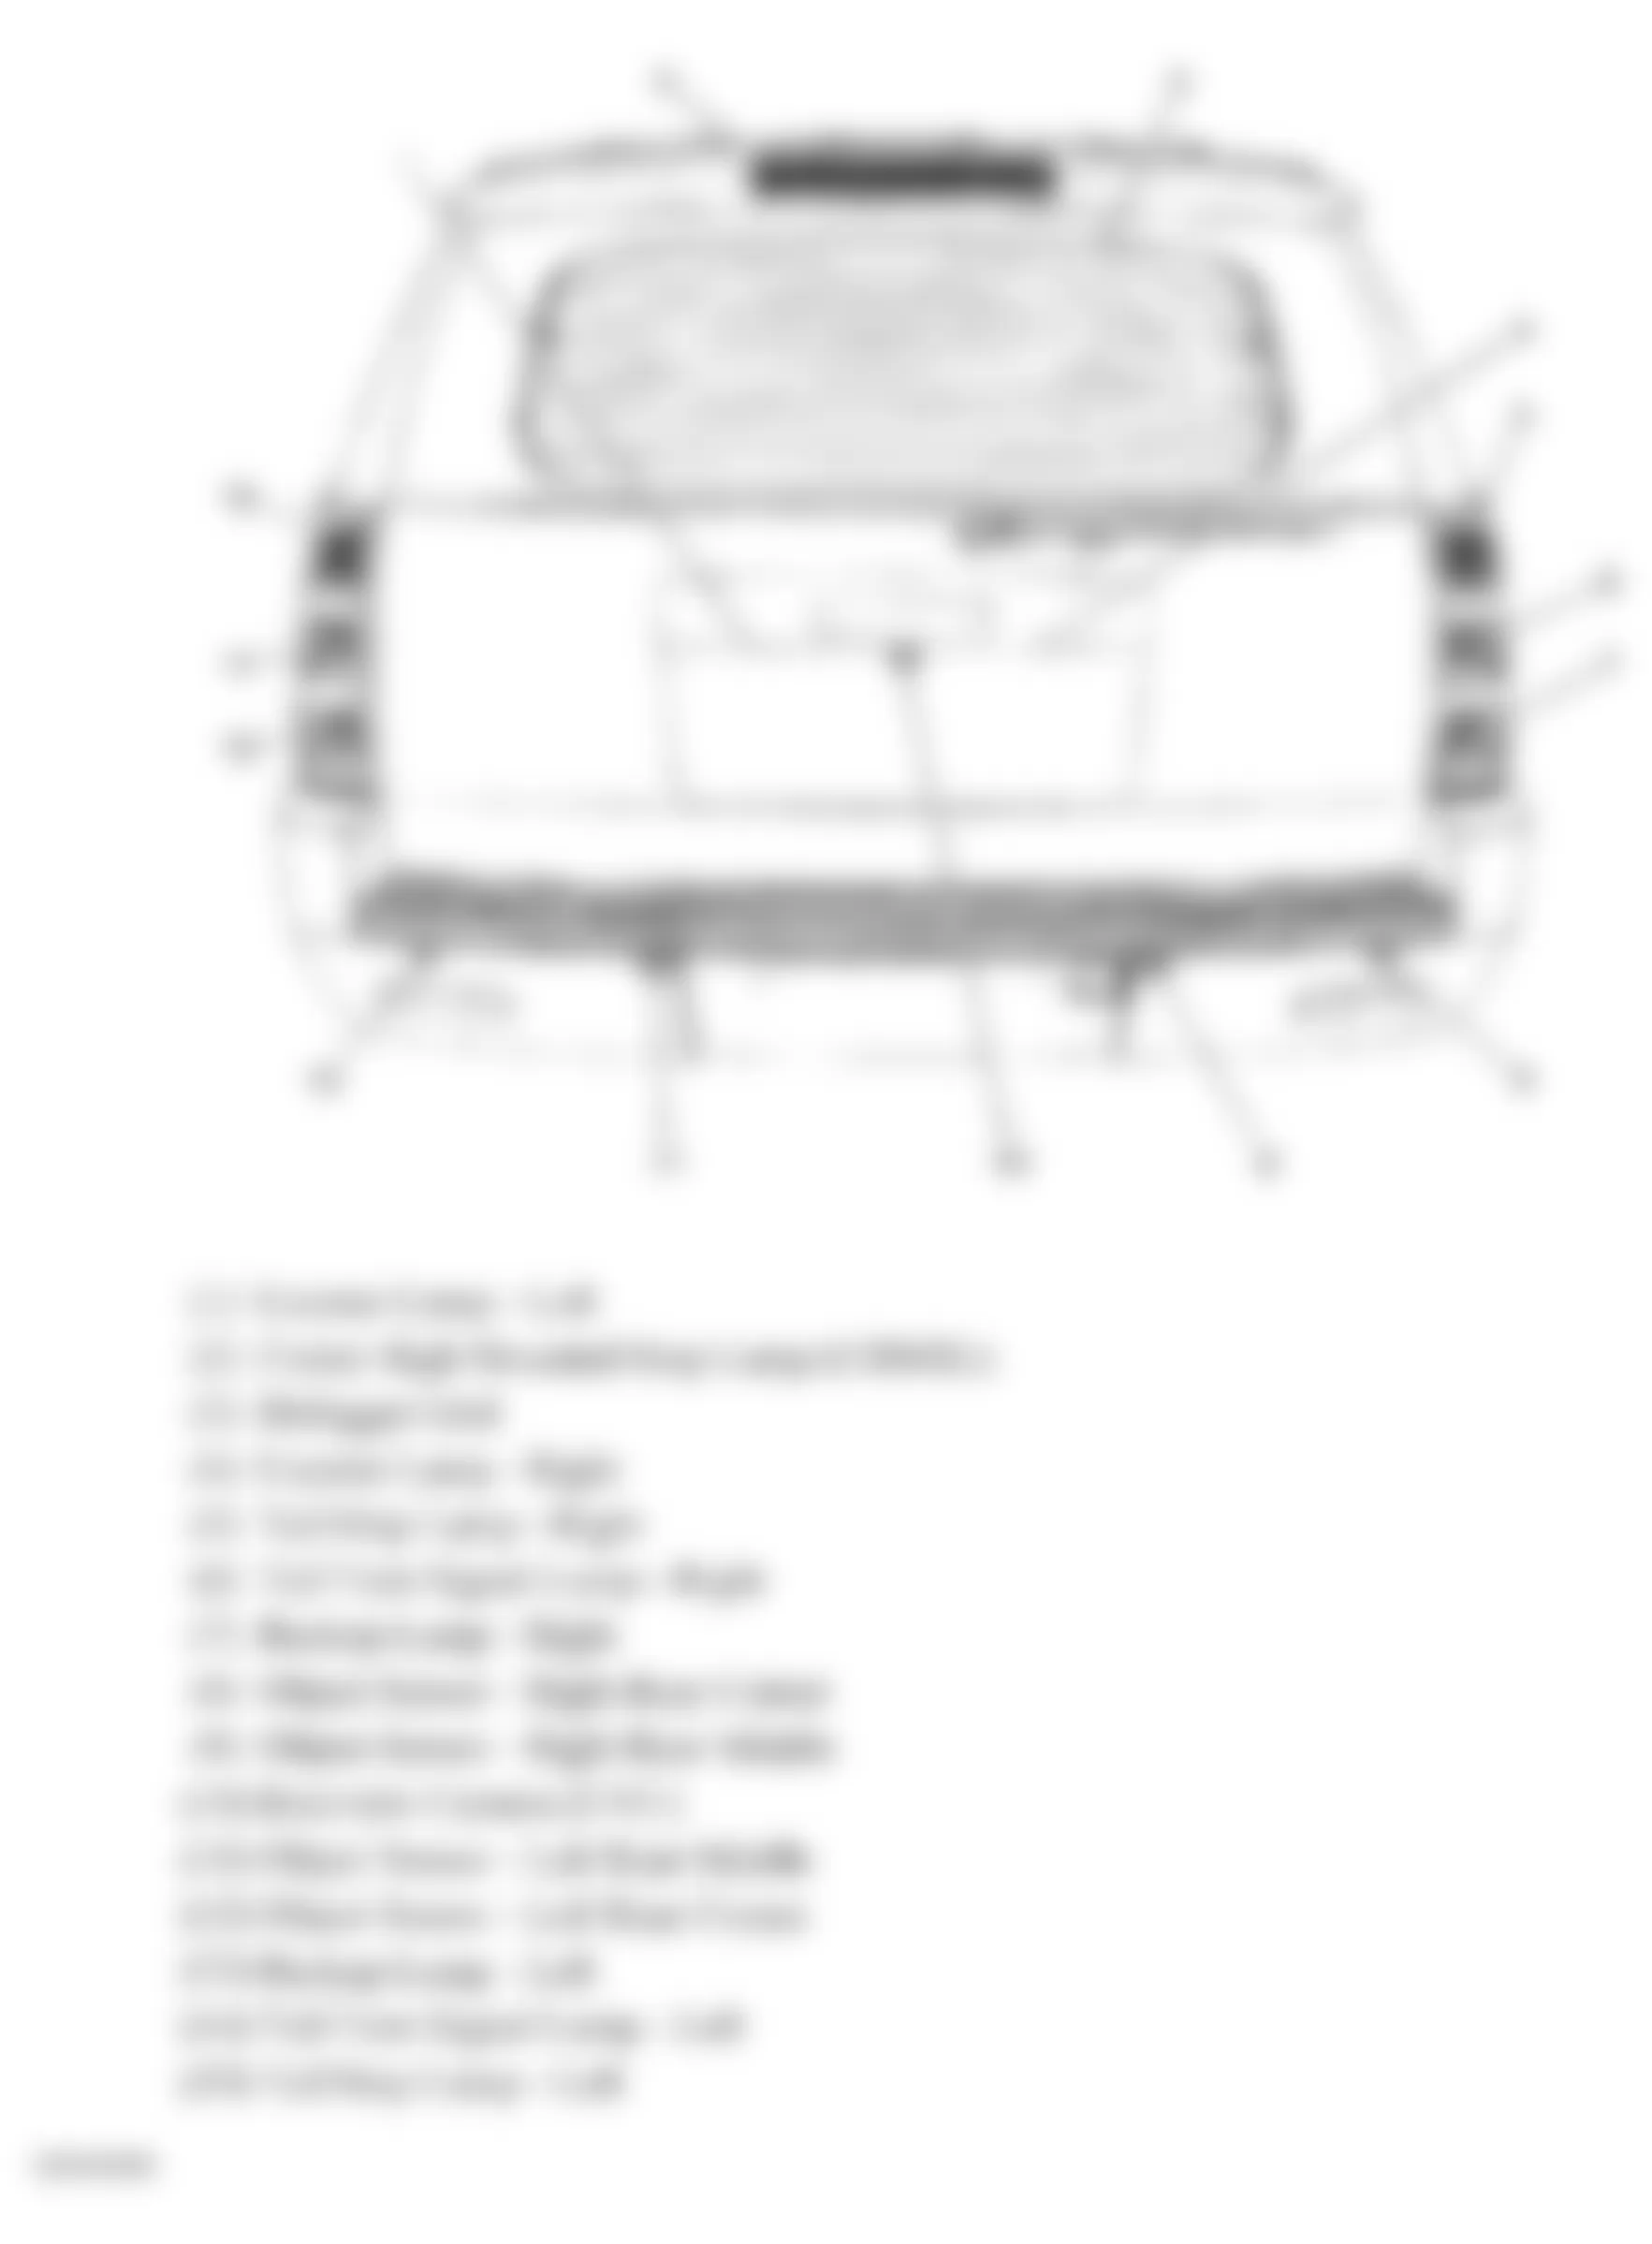 Chevrolet Suburban K2500 2010 - Component Locations -  Rear Of Vehicle (Yukon W/One Piece Liftgate)